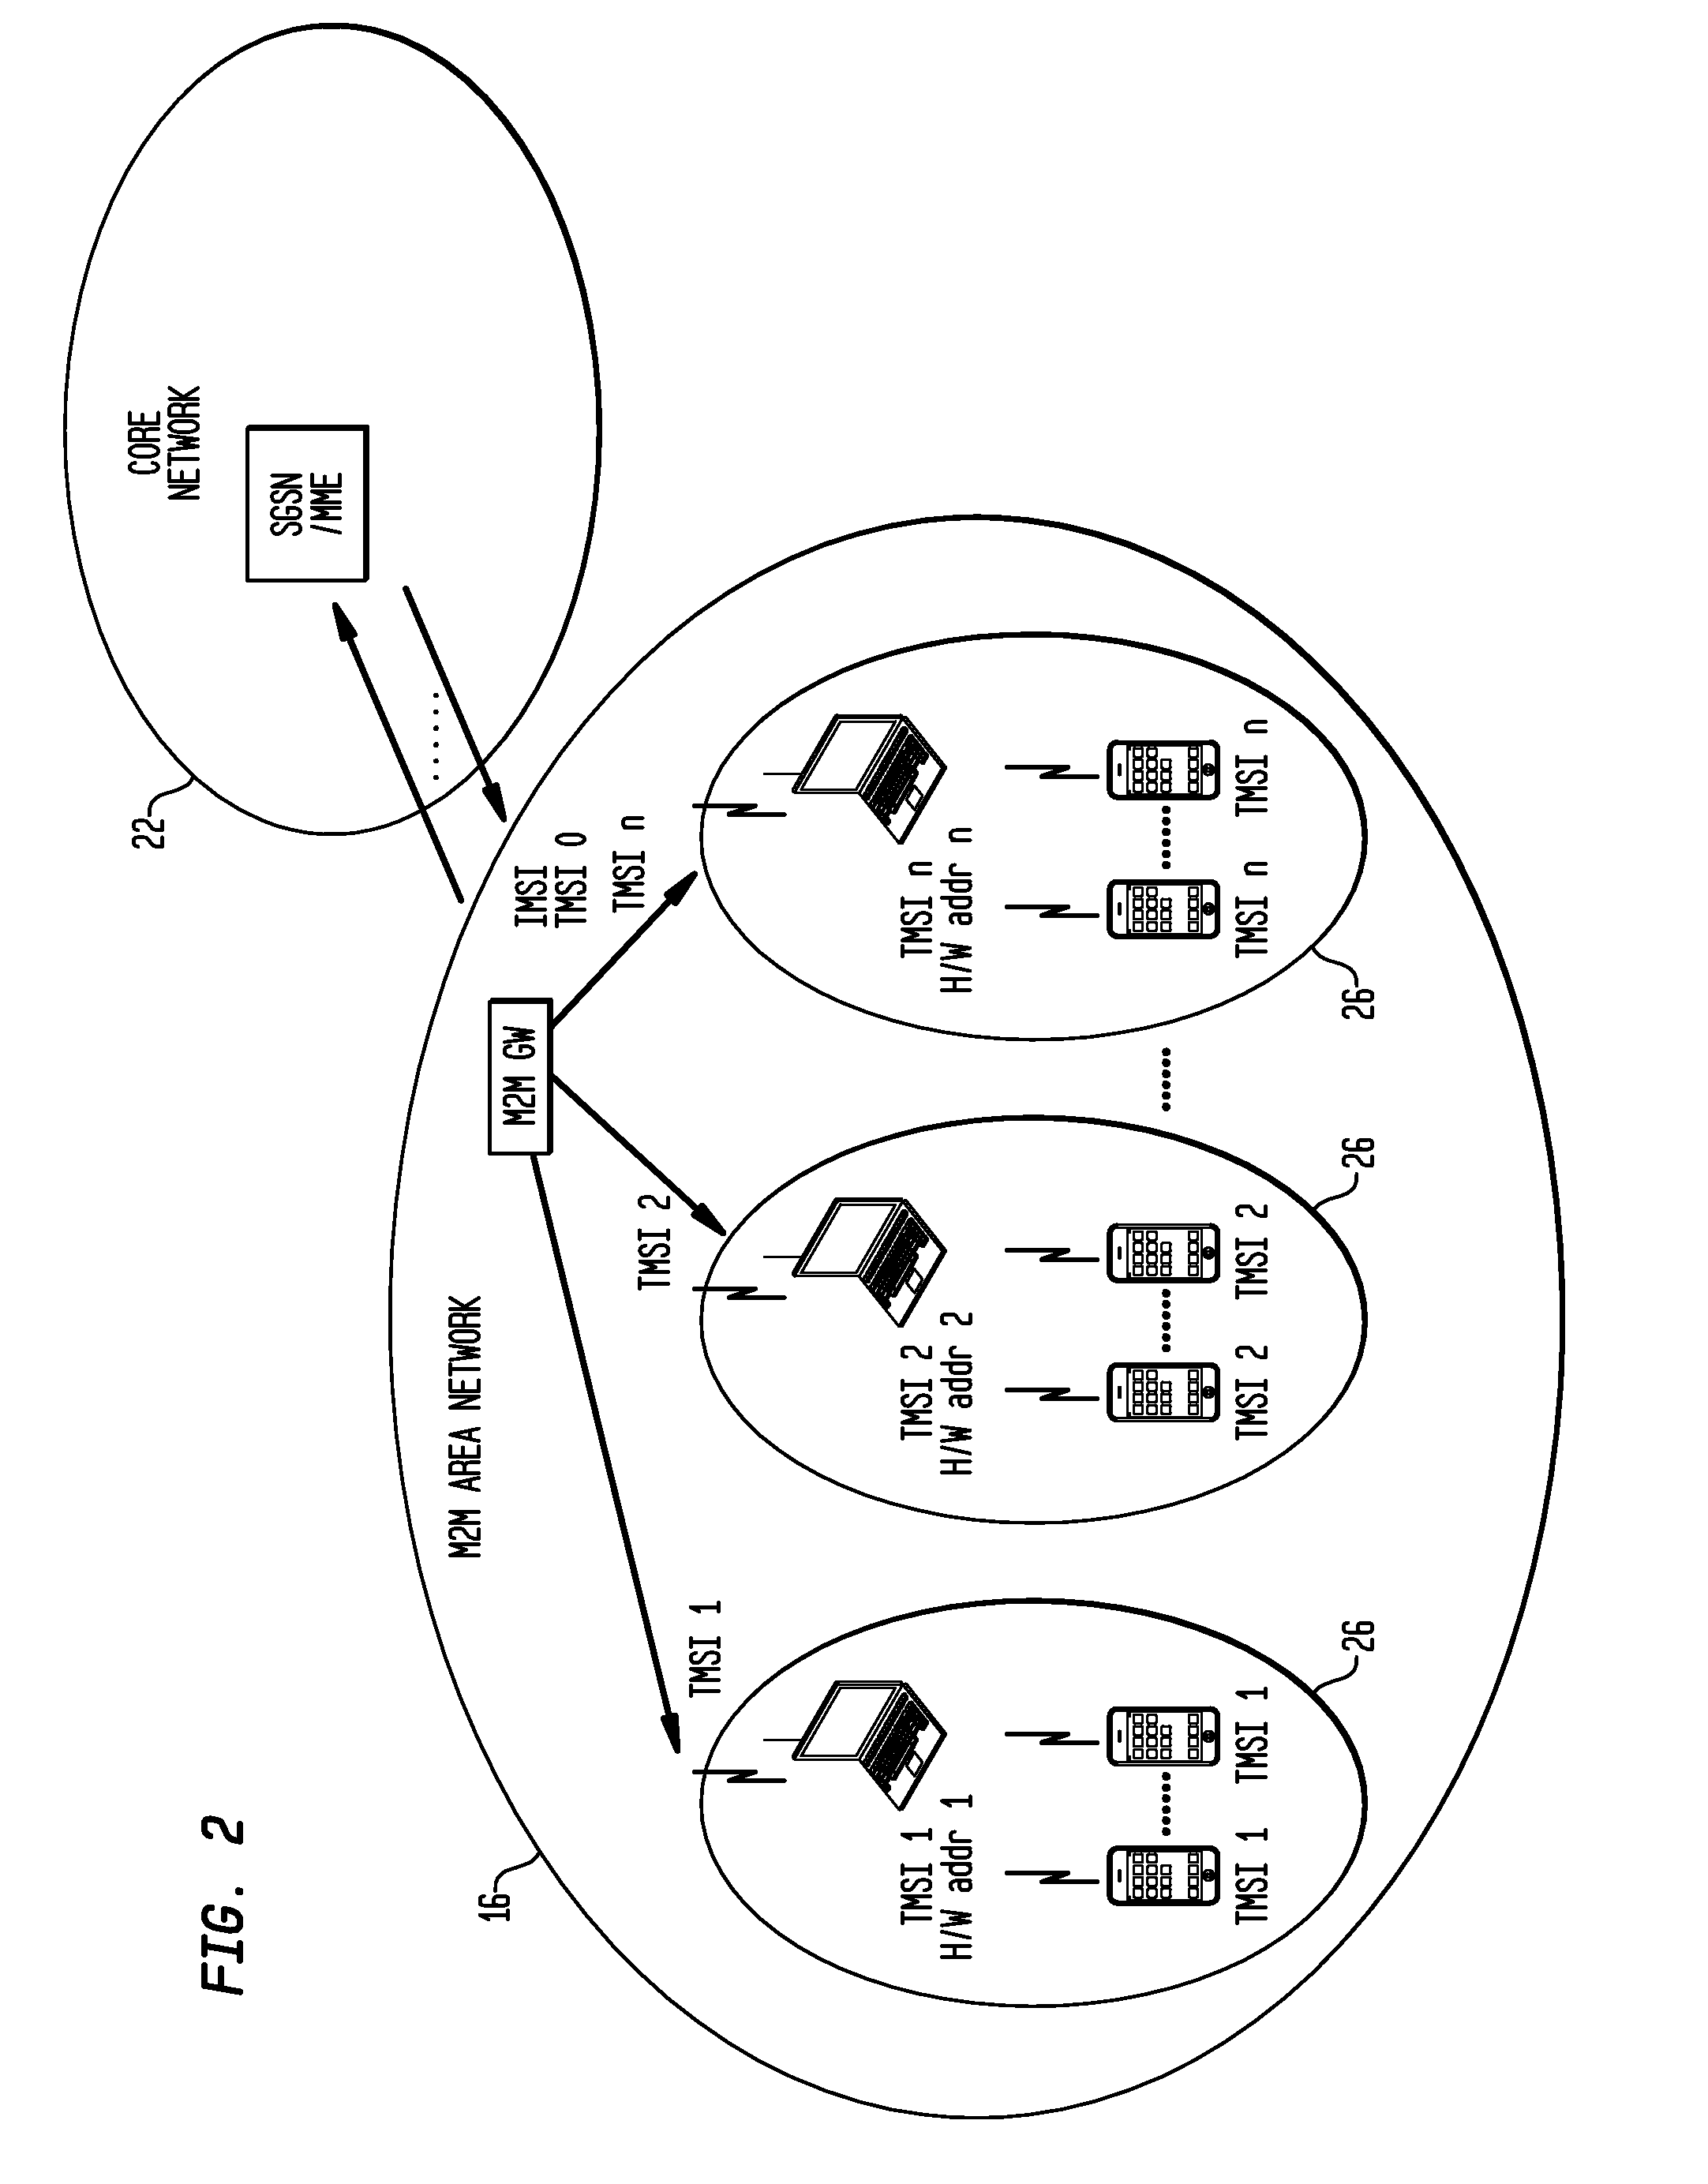 System and Method for Group Communications in 3GPP Machine-to-Machine Networks